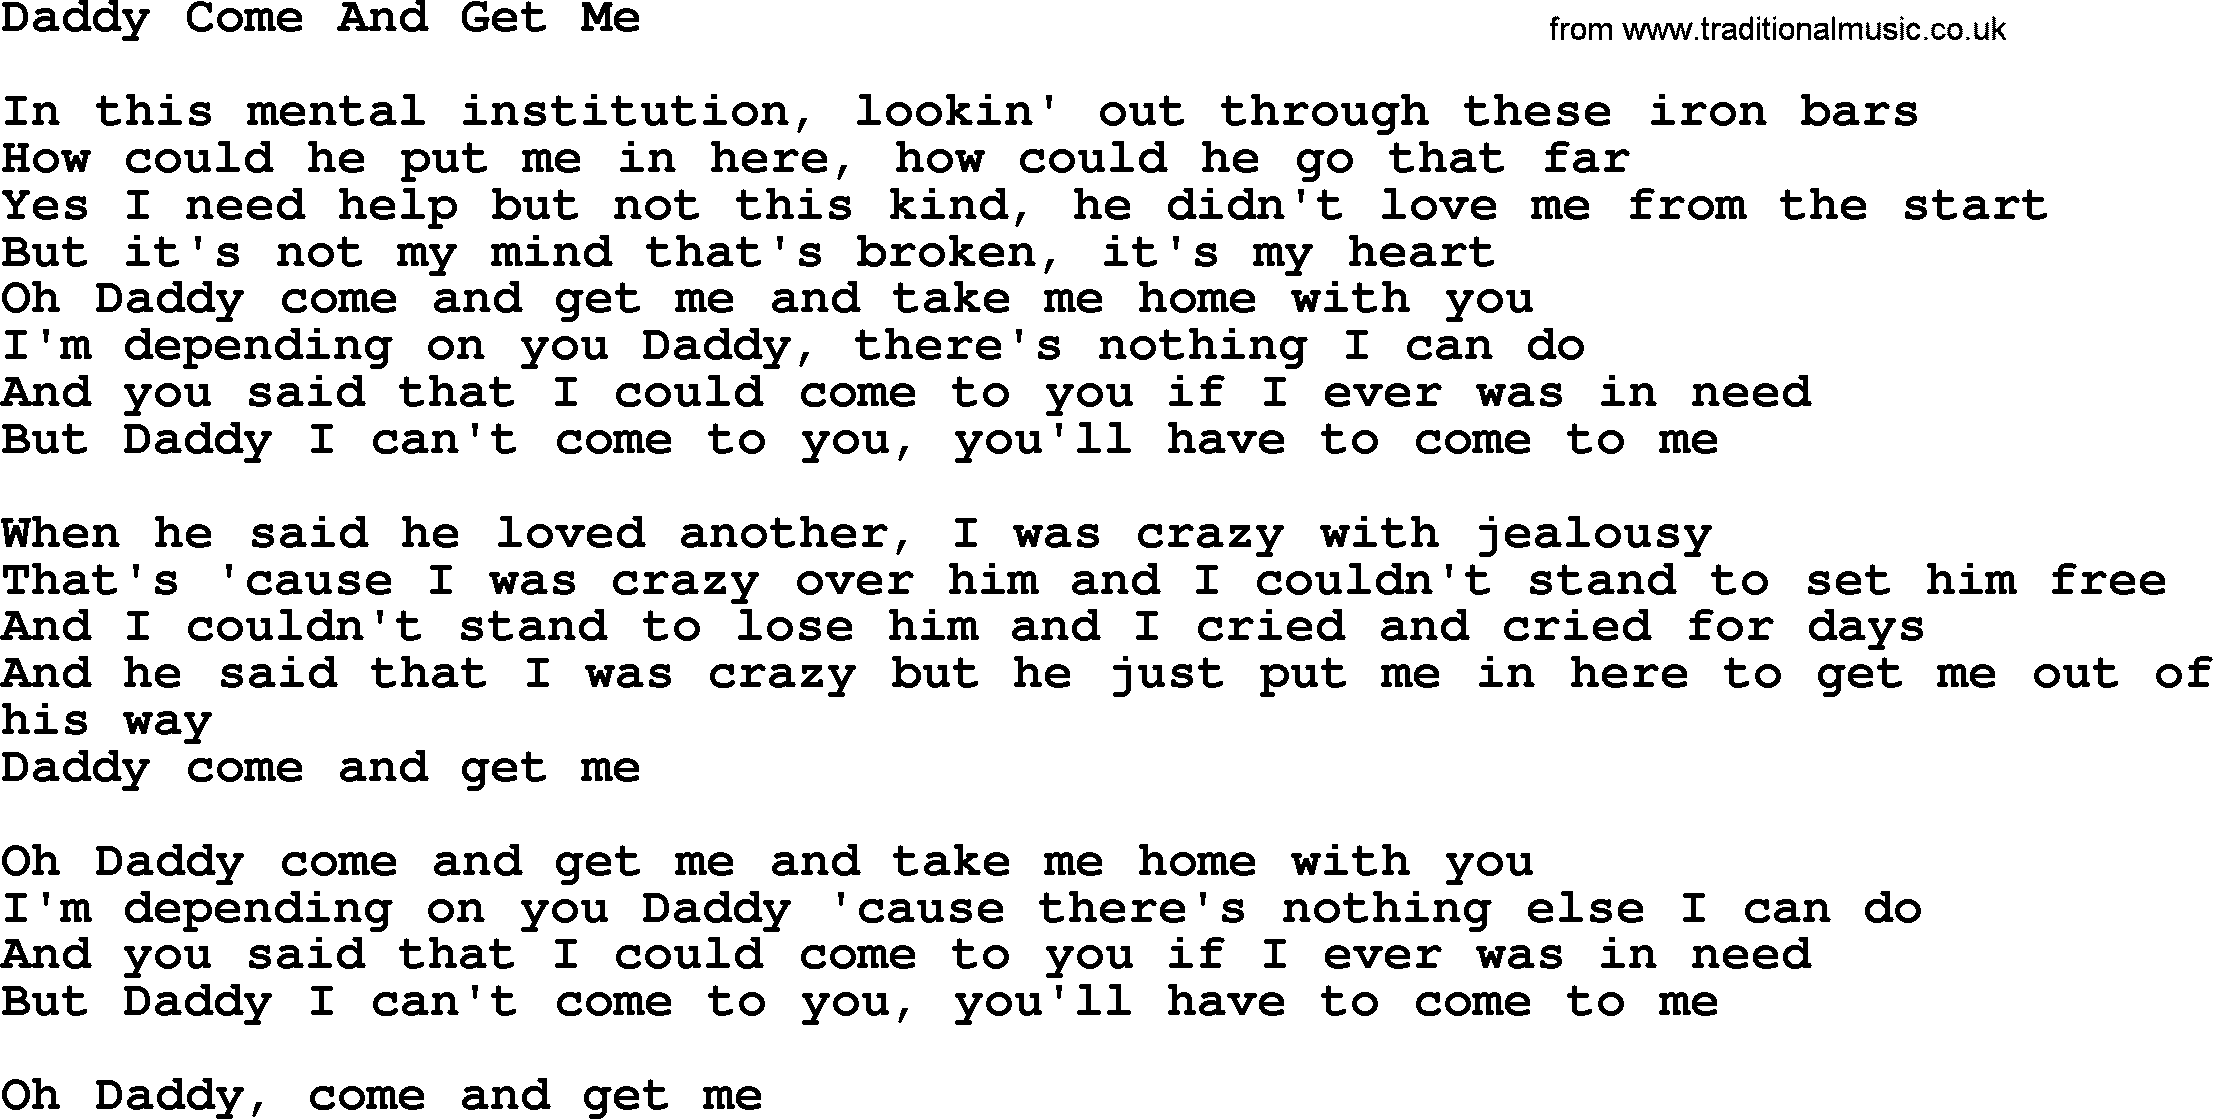 Dolly Parton song Daddy Come And Get Me.txt lyrics